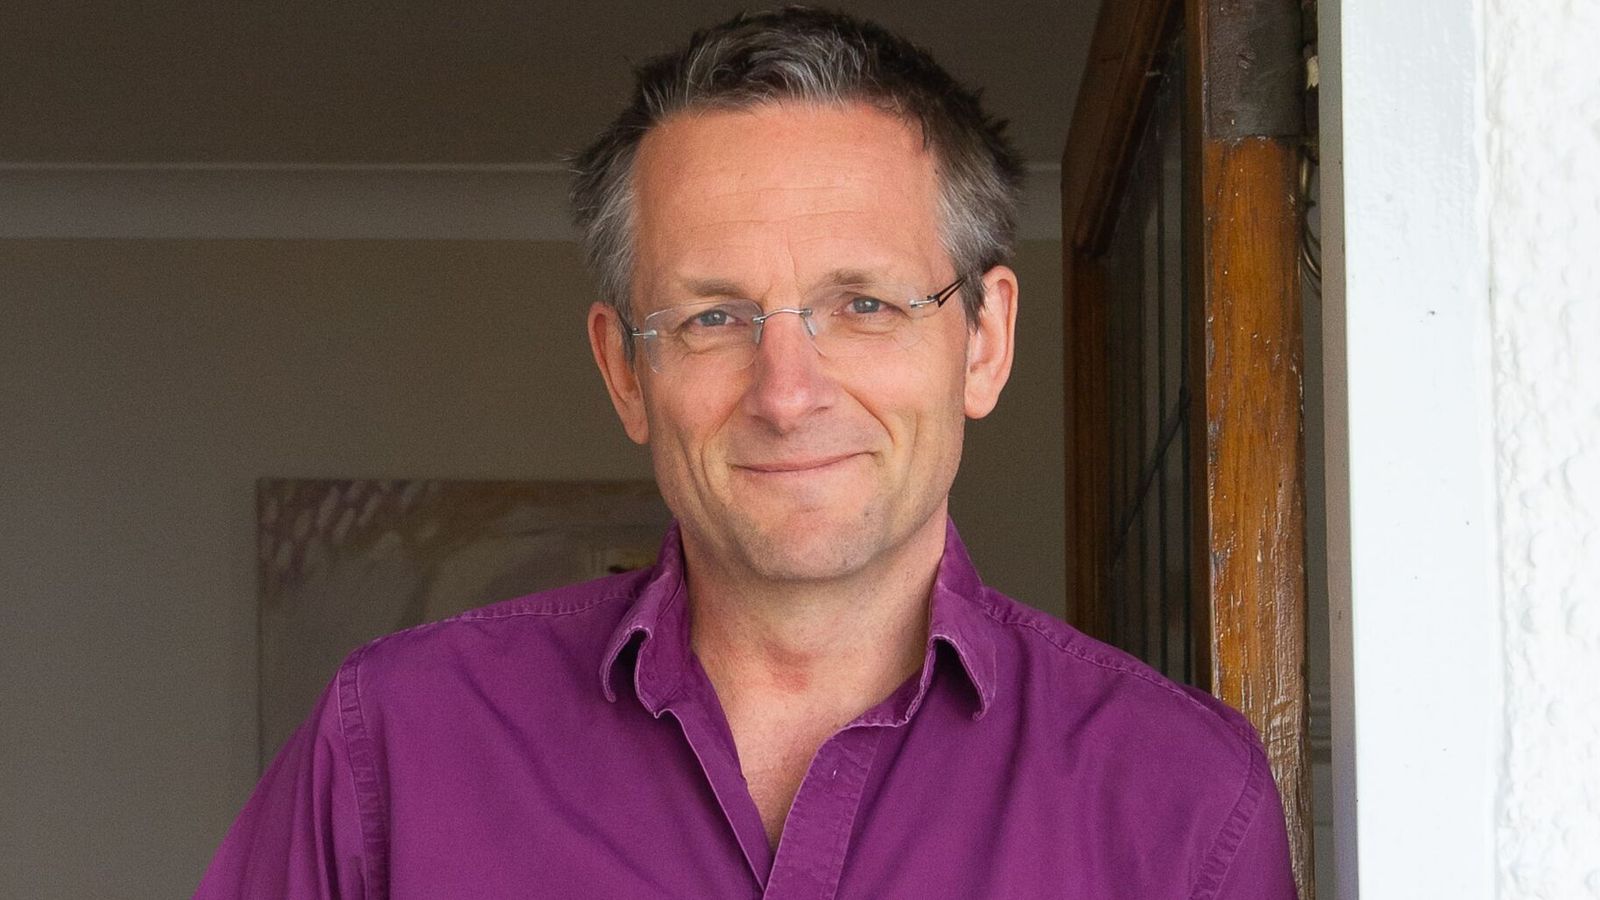 Michael Mosley: Co-presenter reveals TV doctor saved woman's life